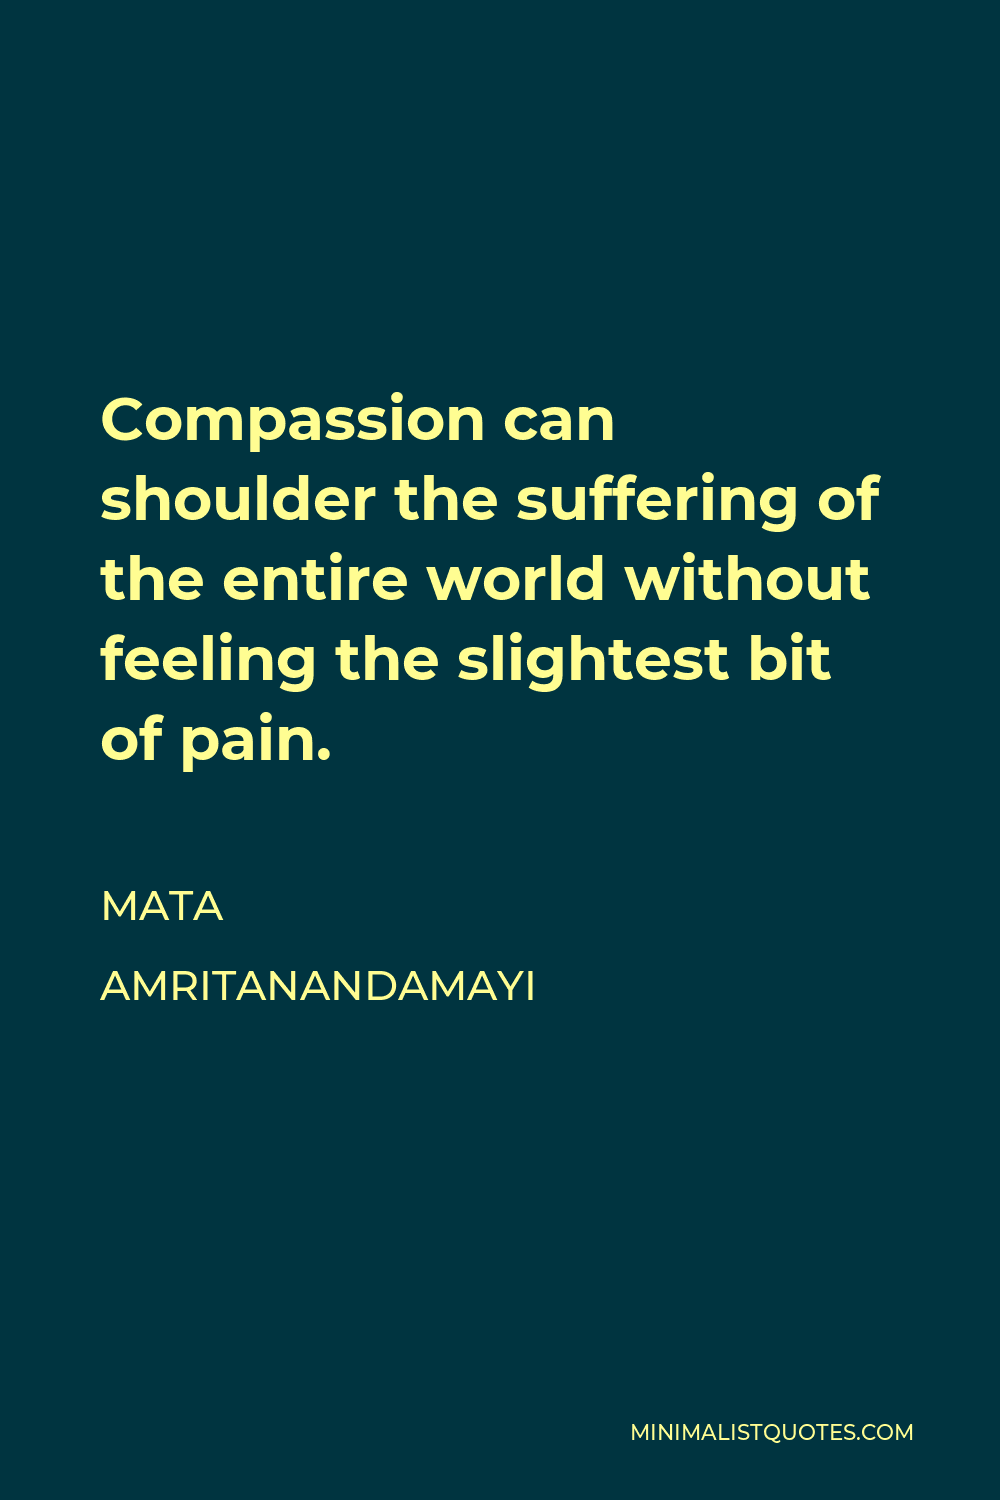 Mata Amritanandamayi Quote - Compassion can shoulder the suffering of the entire world without feeling the slightest bit of pain.